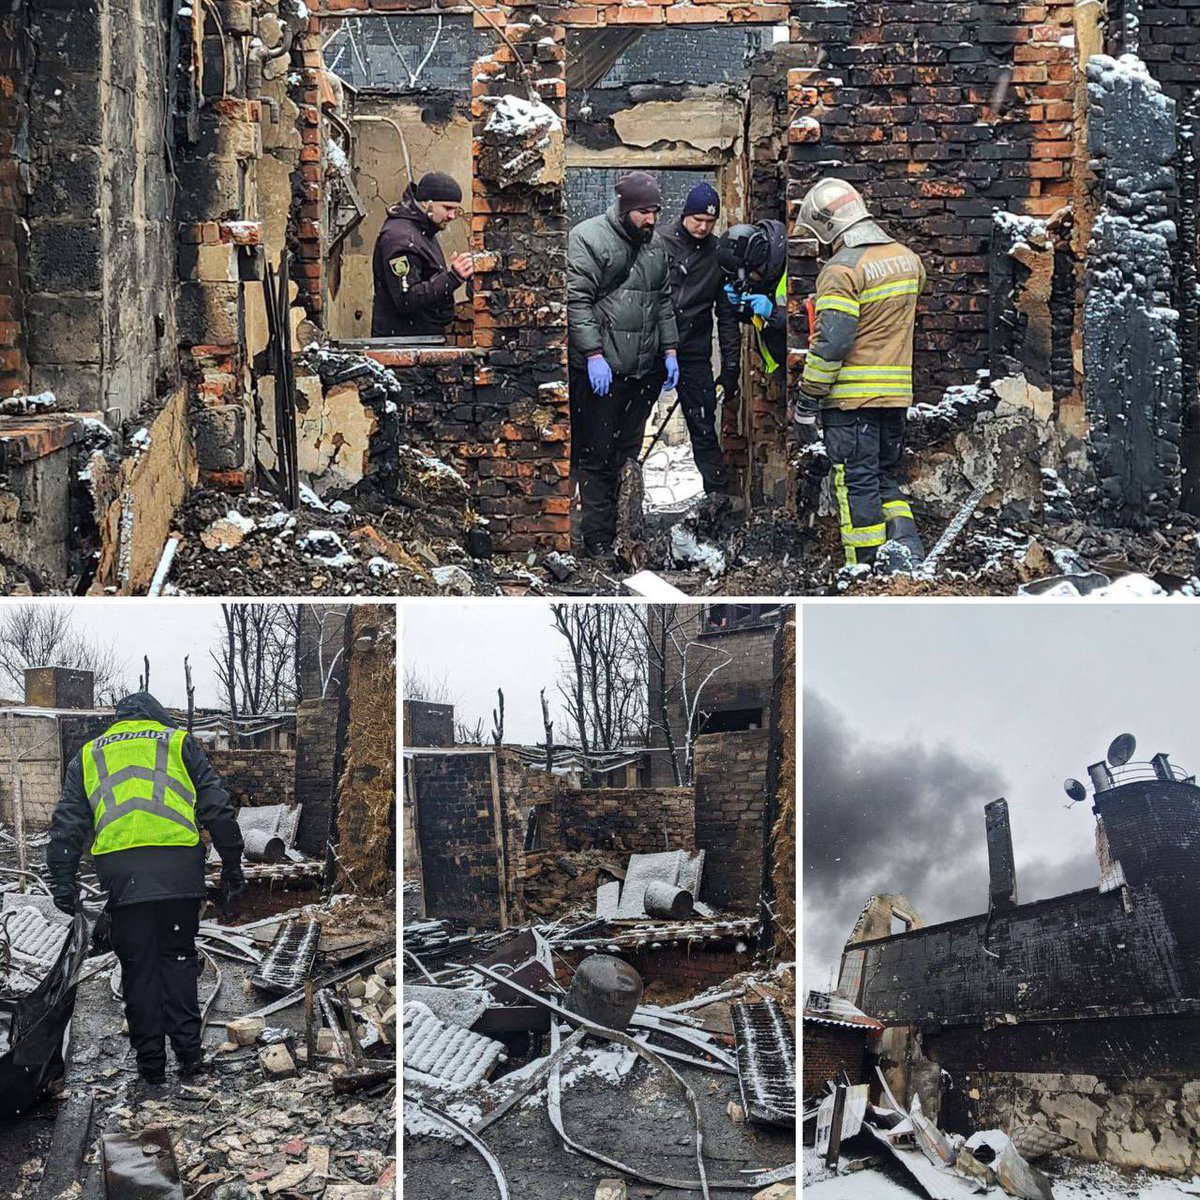 ❗️Last night 🇷🇺attacked Kharkiv with 'Shahed' type drones: 7 people died 3 children were among the dead. Youngest child was only 7 months. Speechless… Drones hit a gas station, fuel spilled all over and 14 private residential buildings were on fire #RussiaIsATerroristState